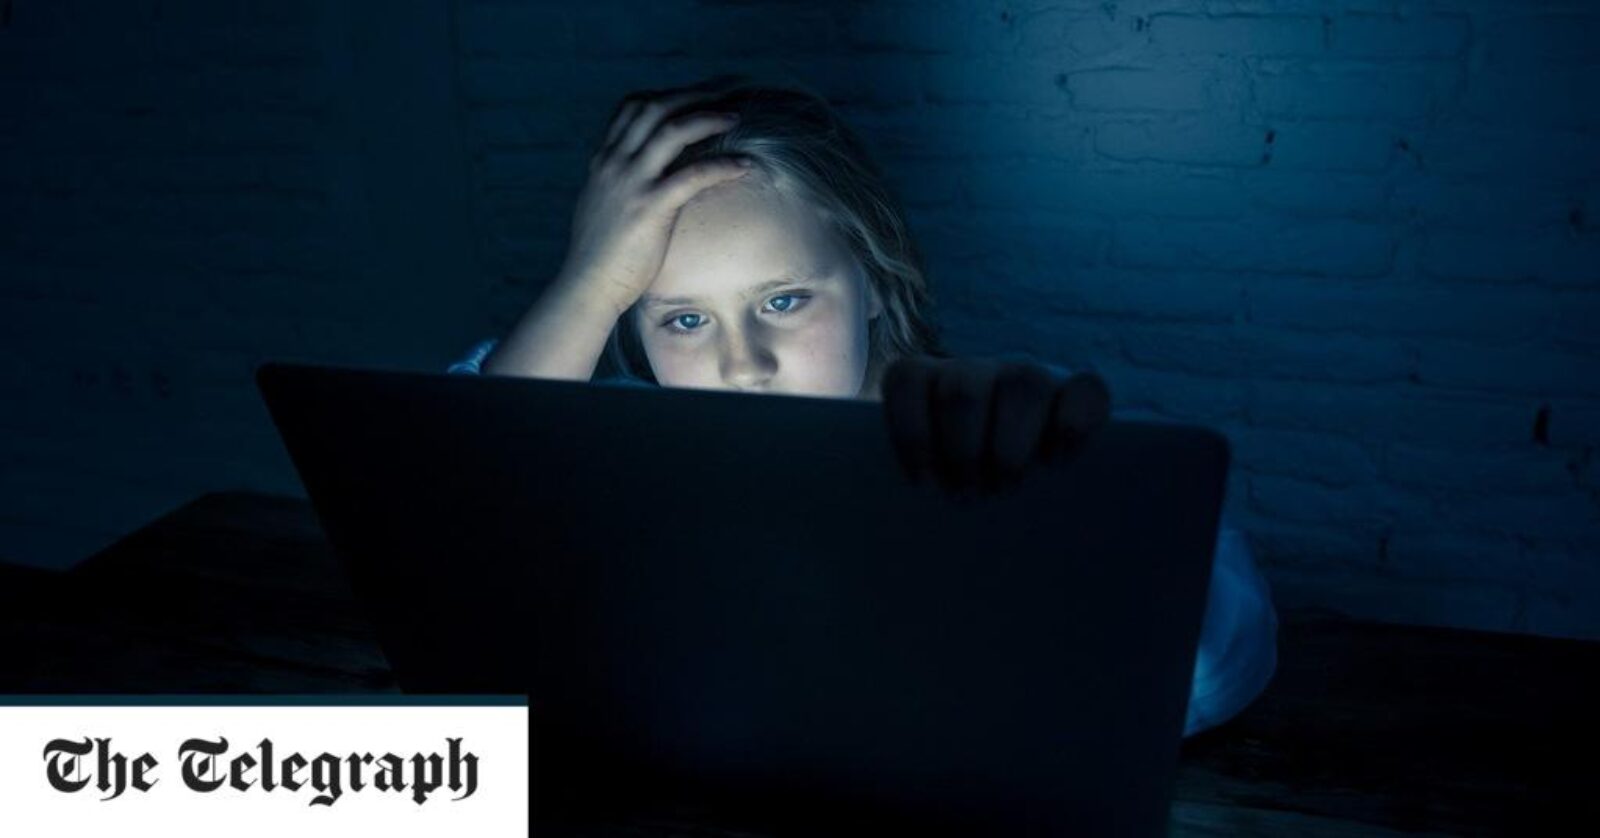 New Telegraph Article on Online Safety Bill